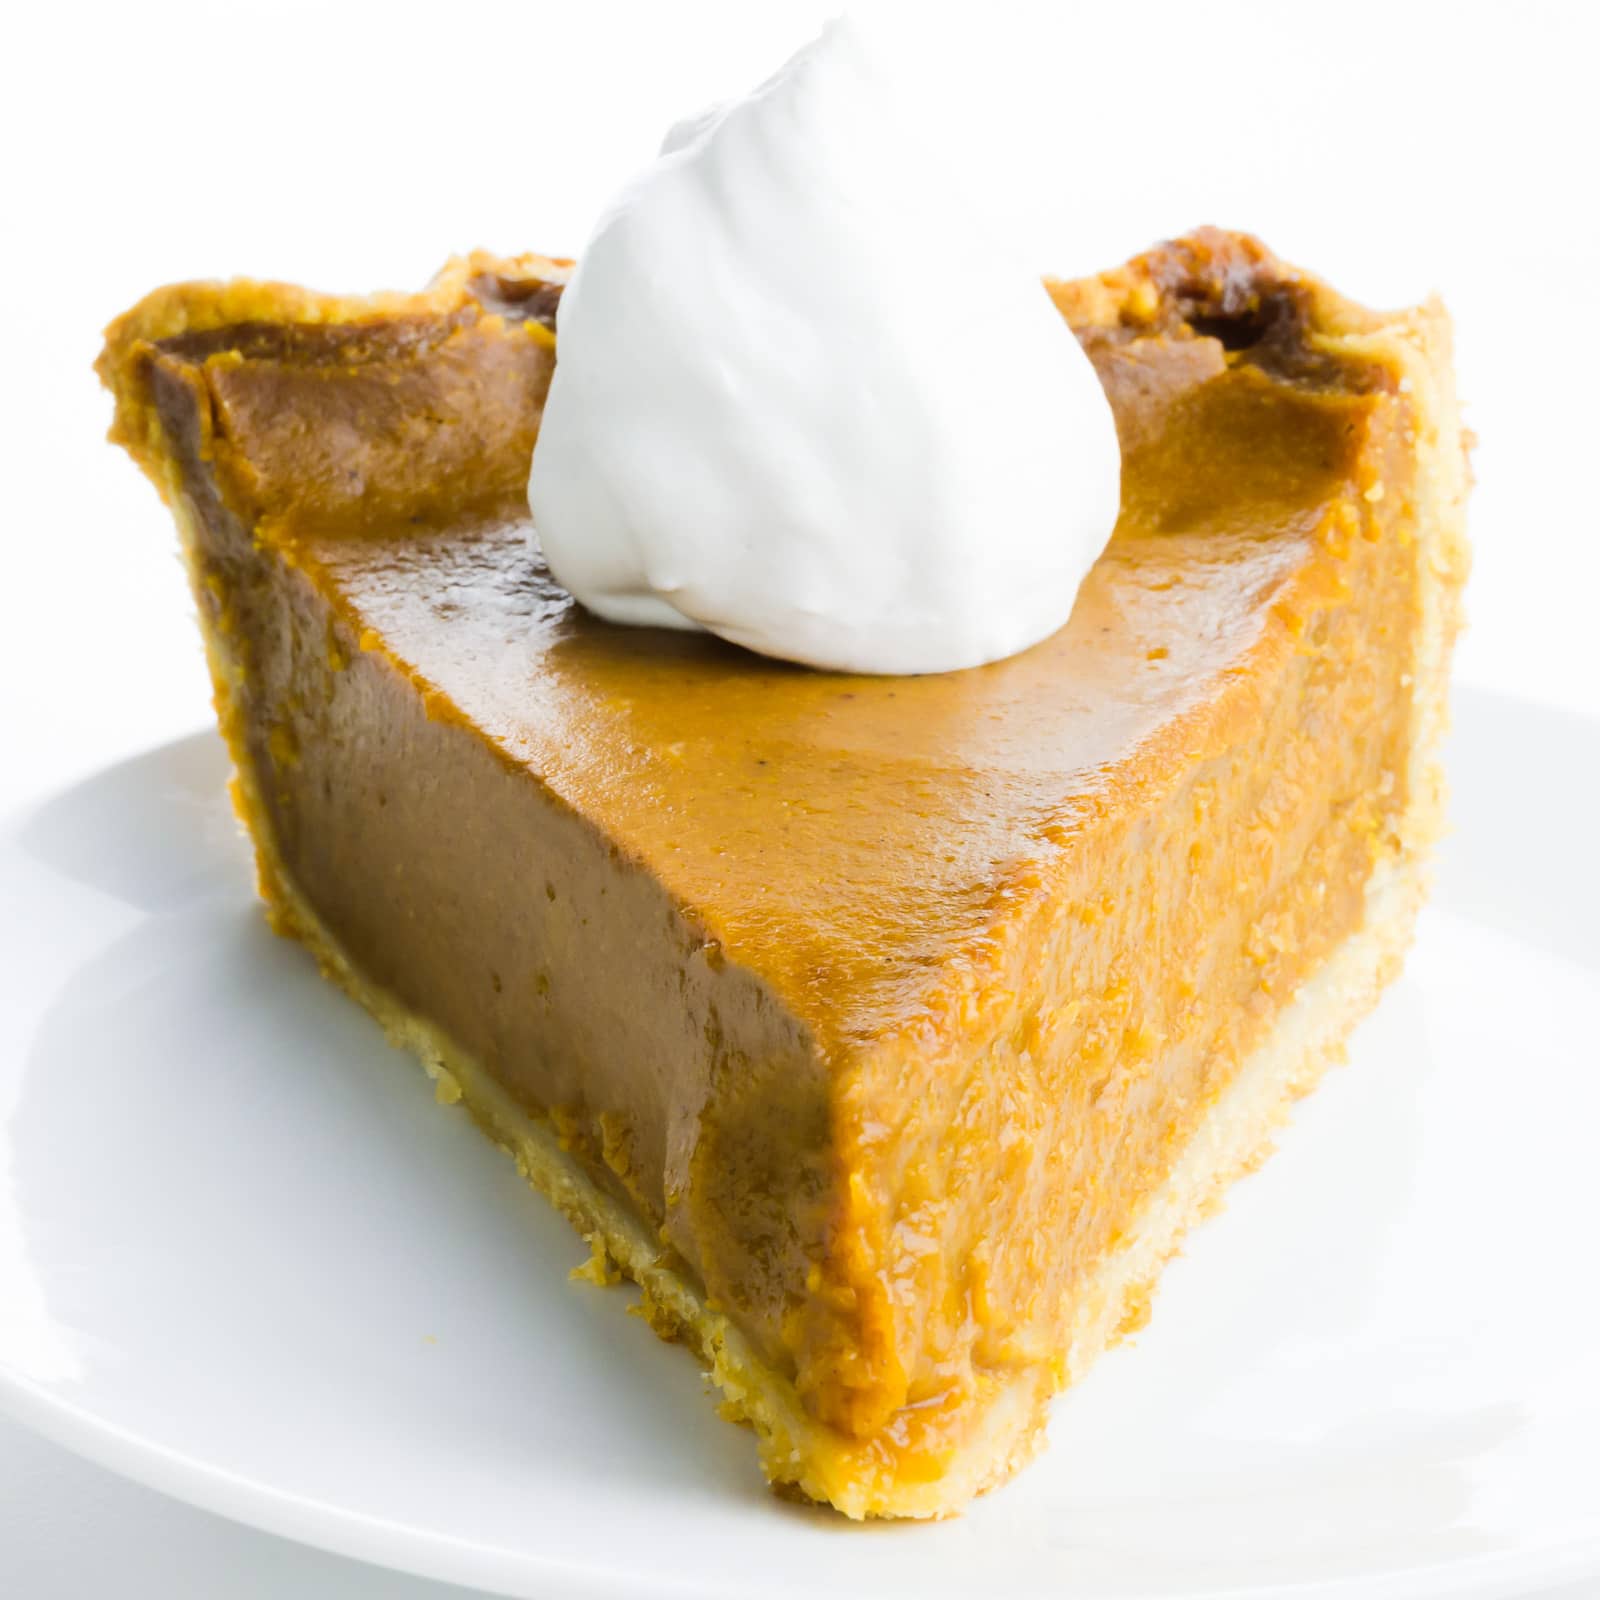 A slice of pumpkin pie with whipped cream sits on a plate.